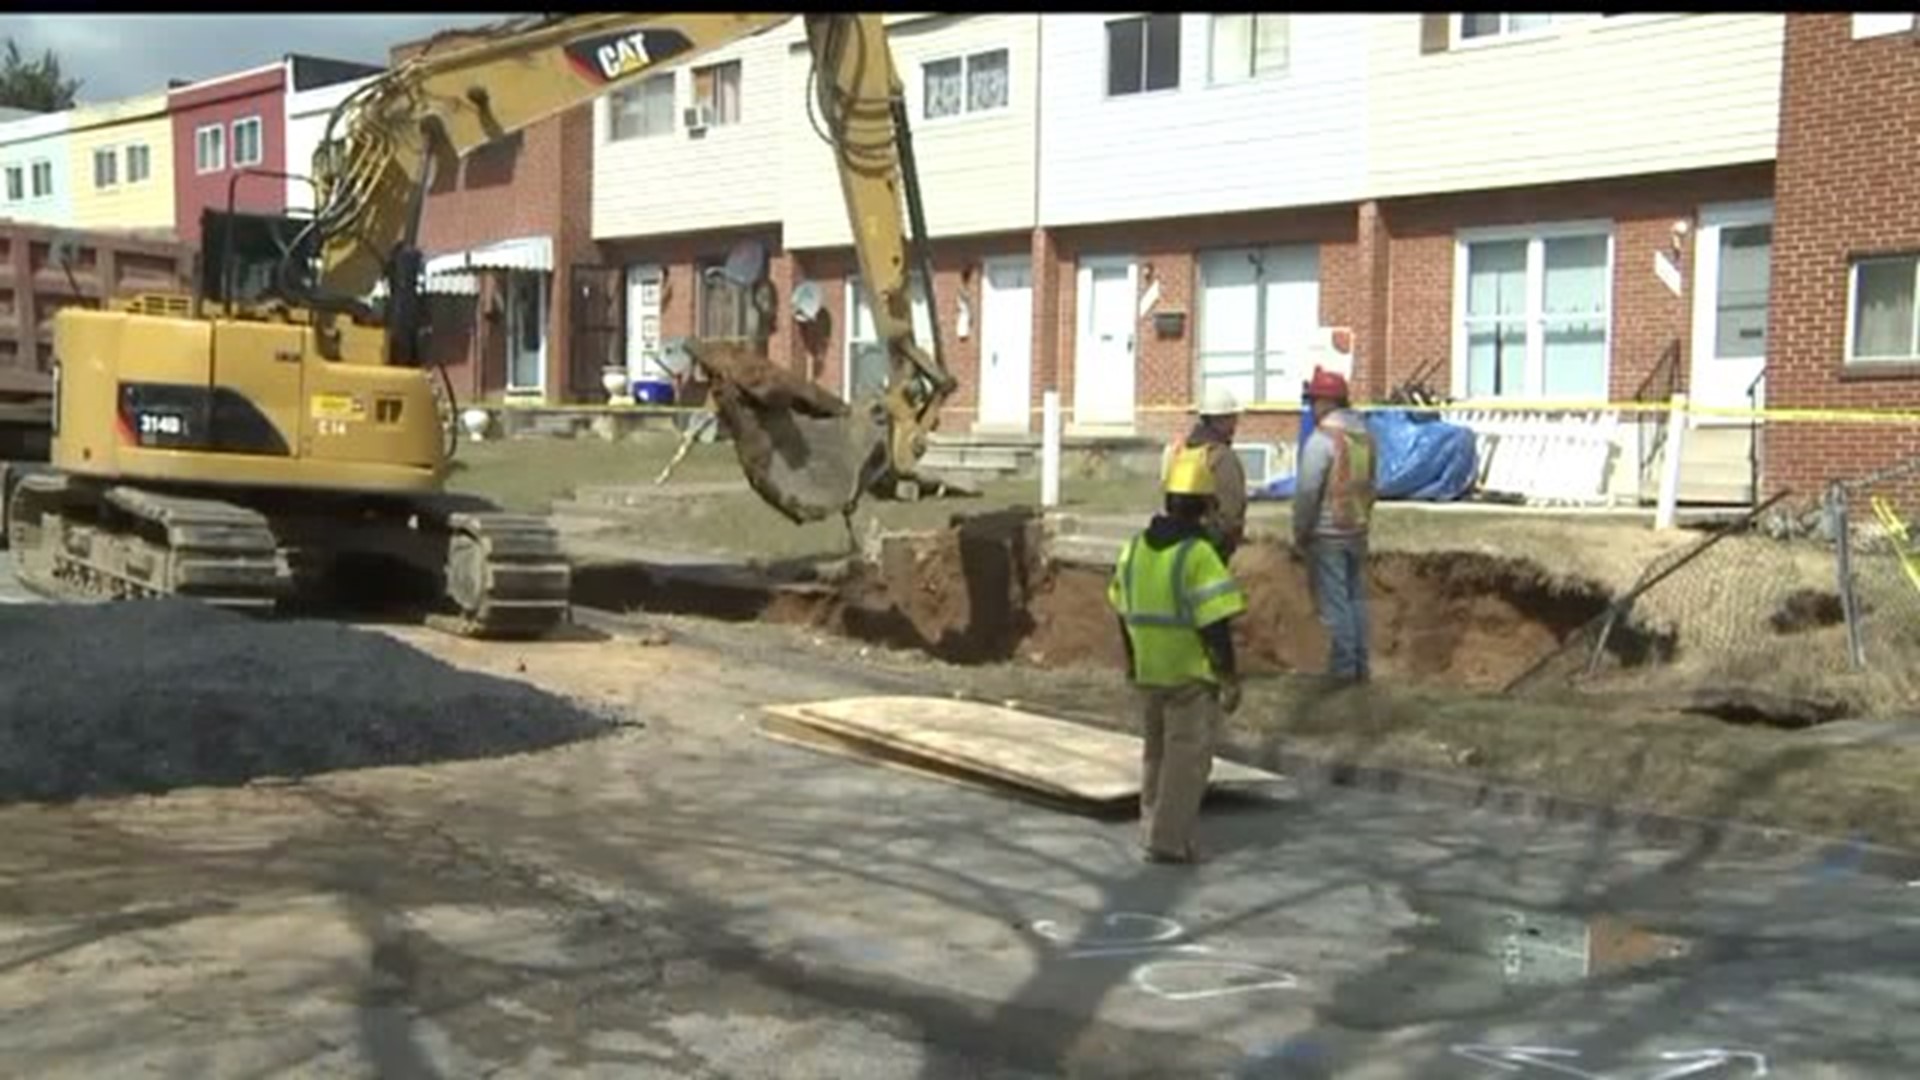 Dauphin County commissioners moves closer to supplying sinkhole relief